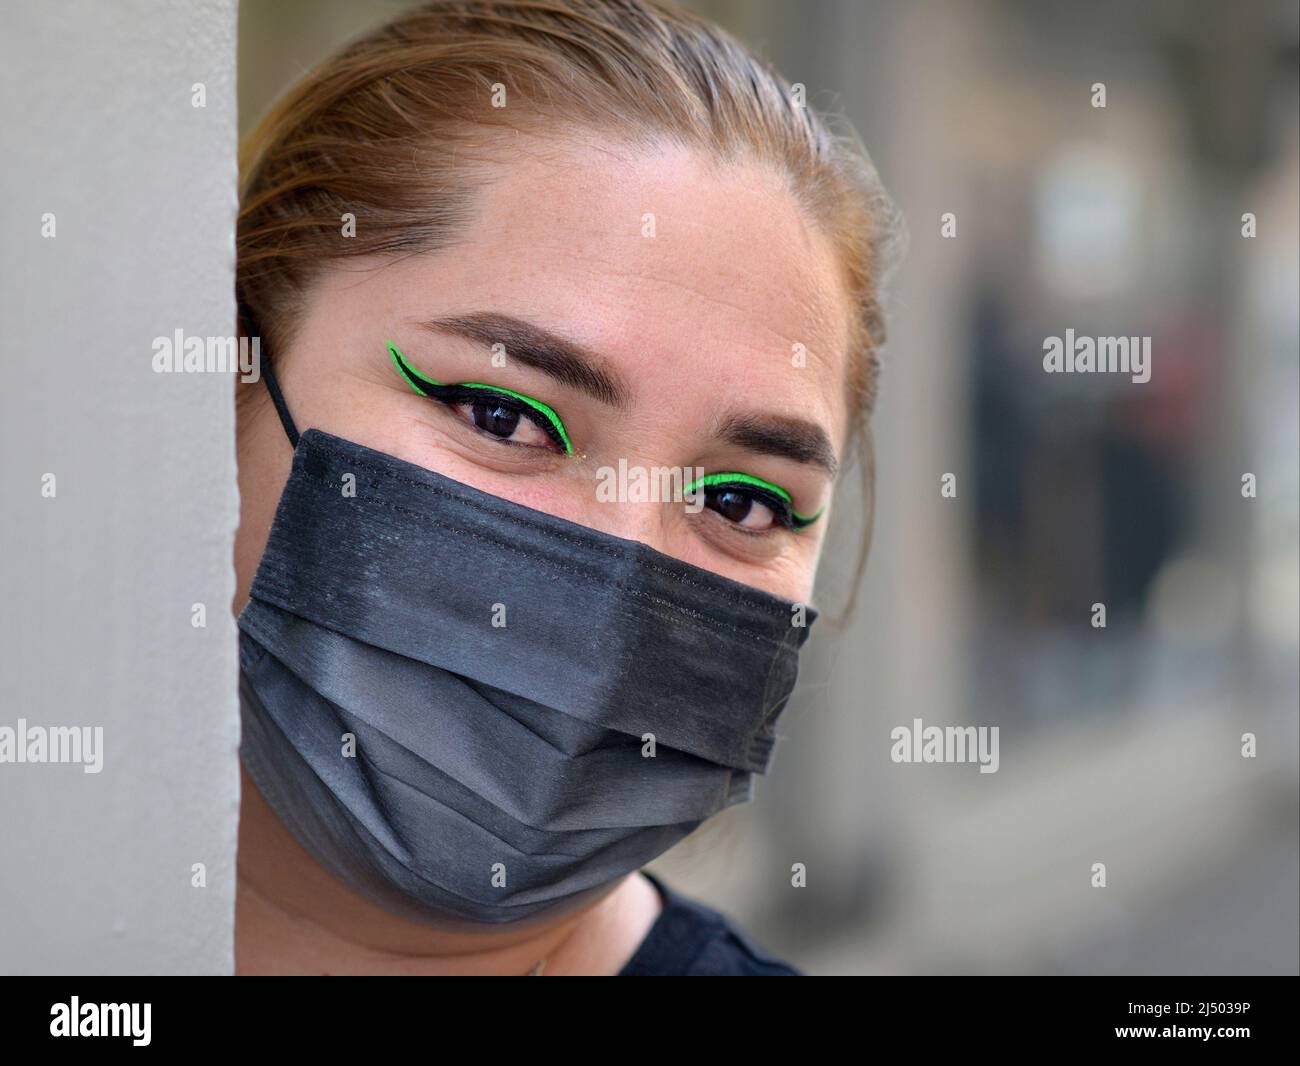 Young beautiful Mexican Latina woman with distinctive green eyeliner wears black surgical face mask and looks around a corner at viewer. Stock Photo